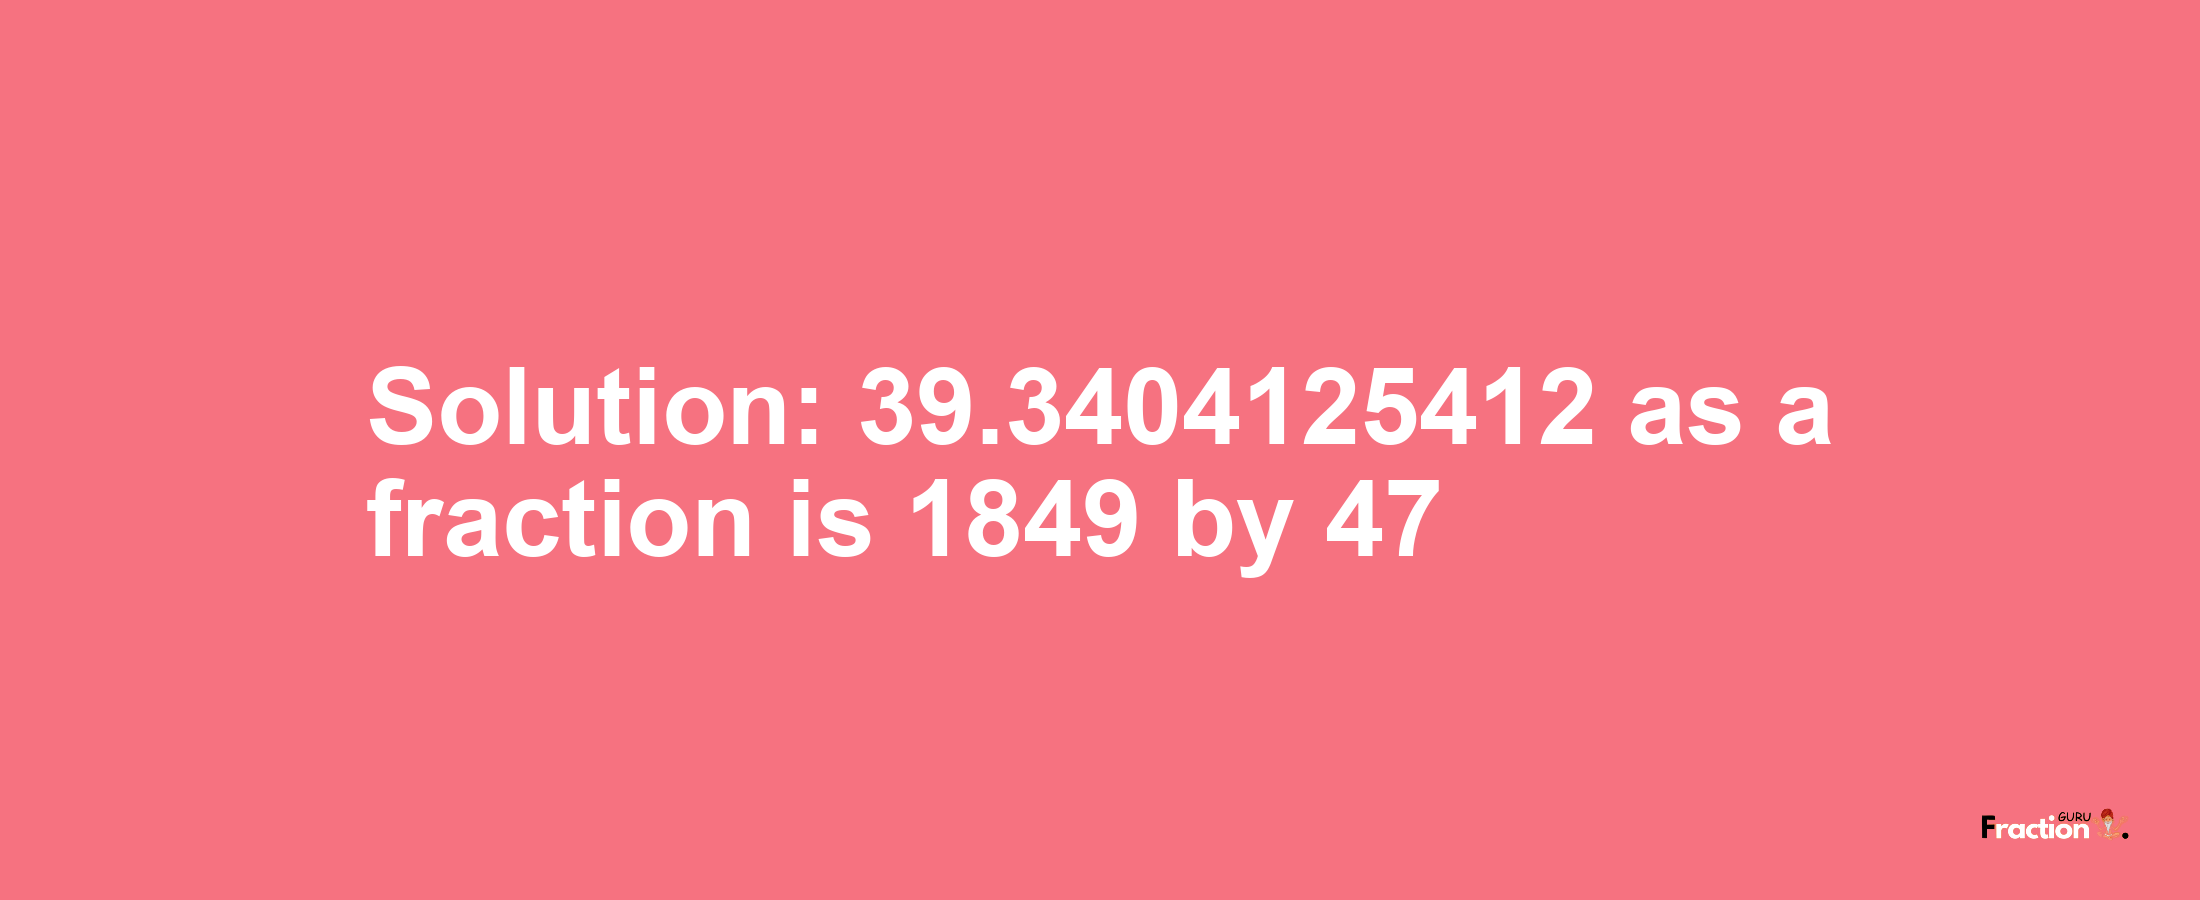 Solution:39.3404125412 as a fraction is 1849/47